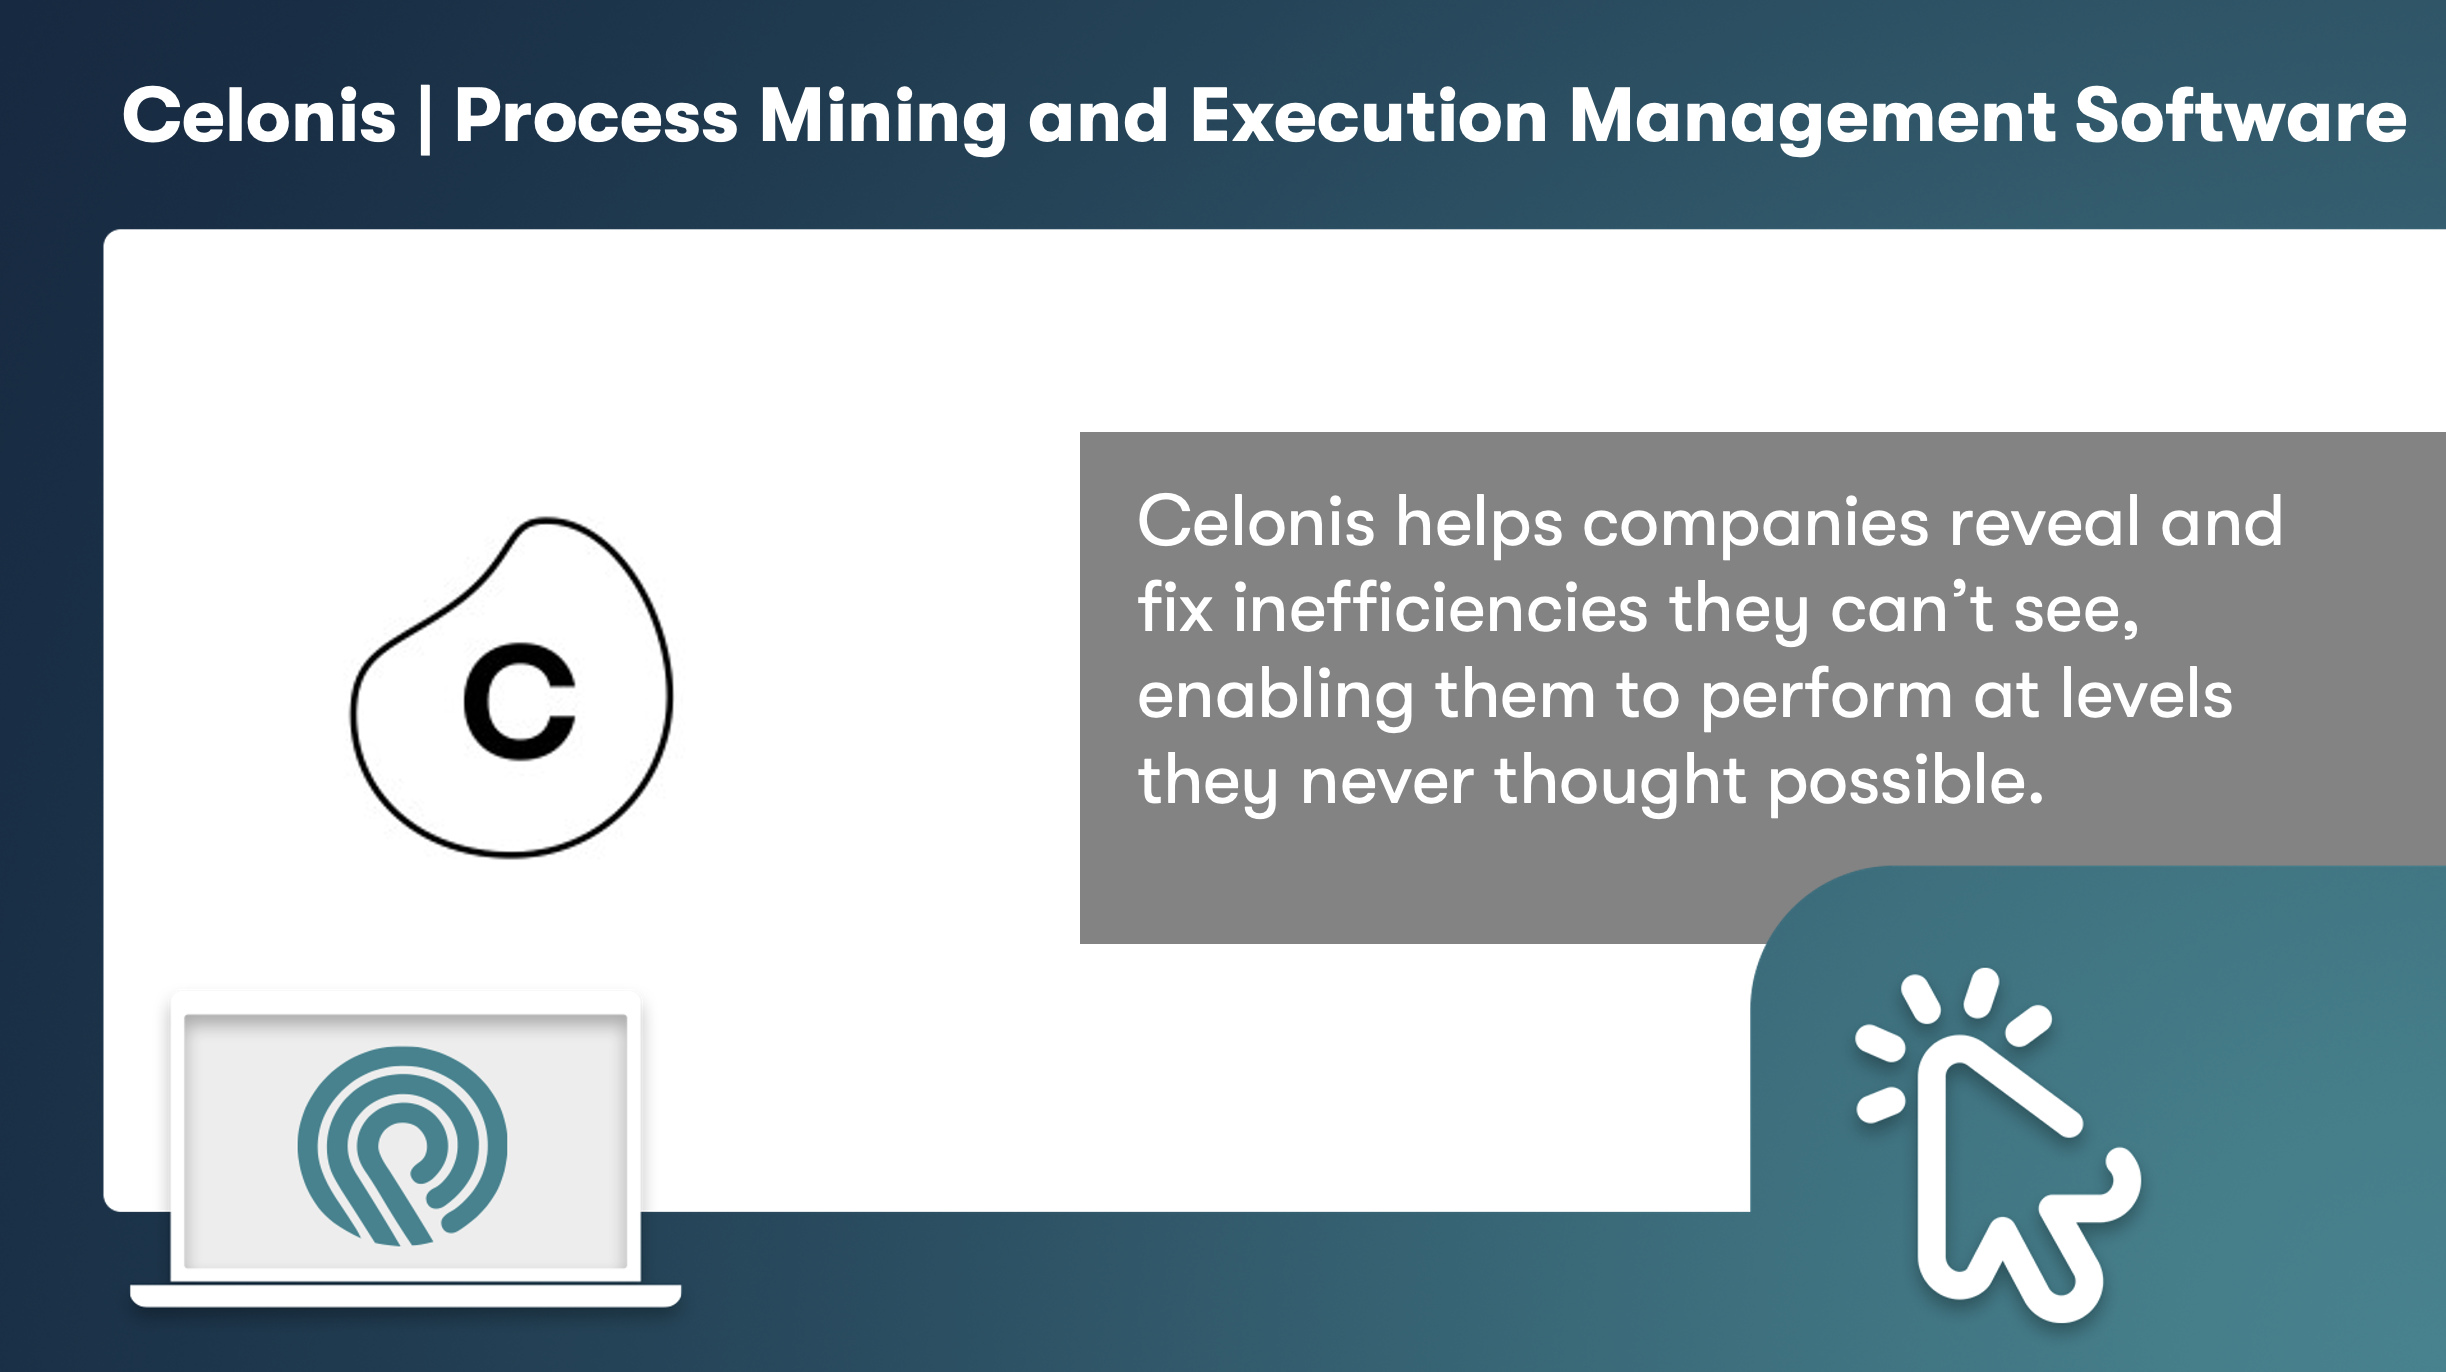 Celonis | Process Mining and Execution Management Software